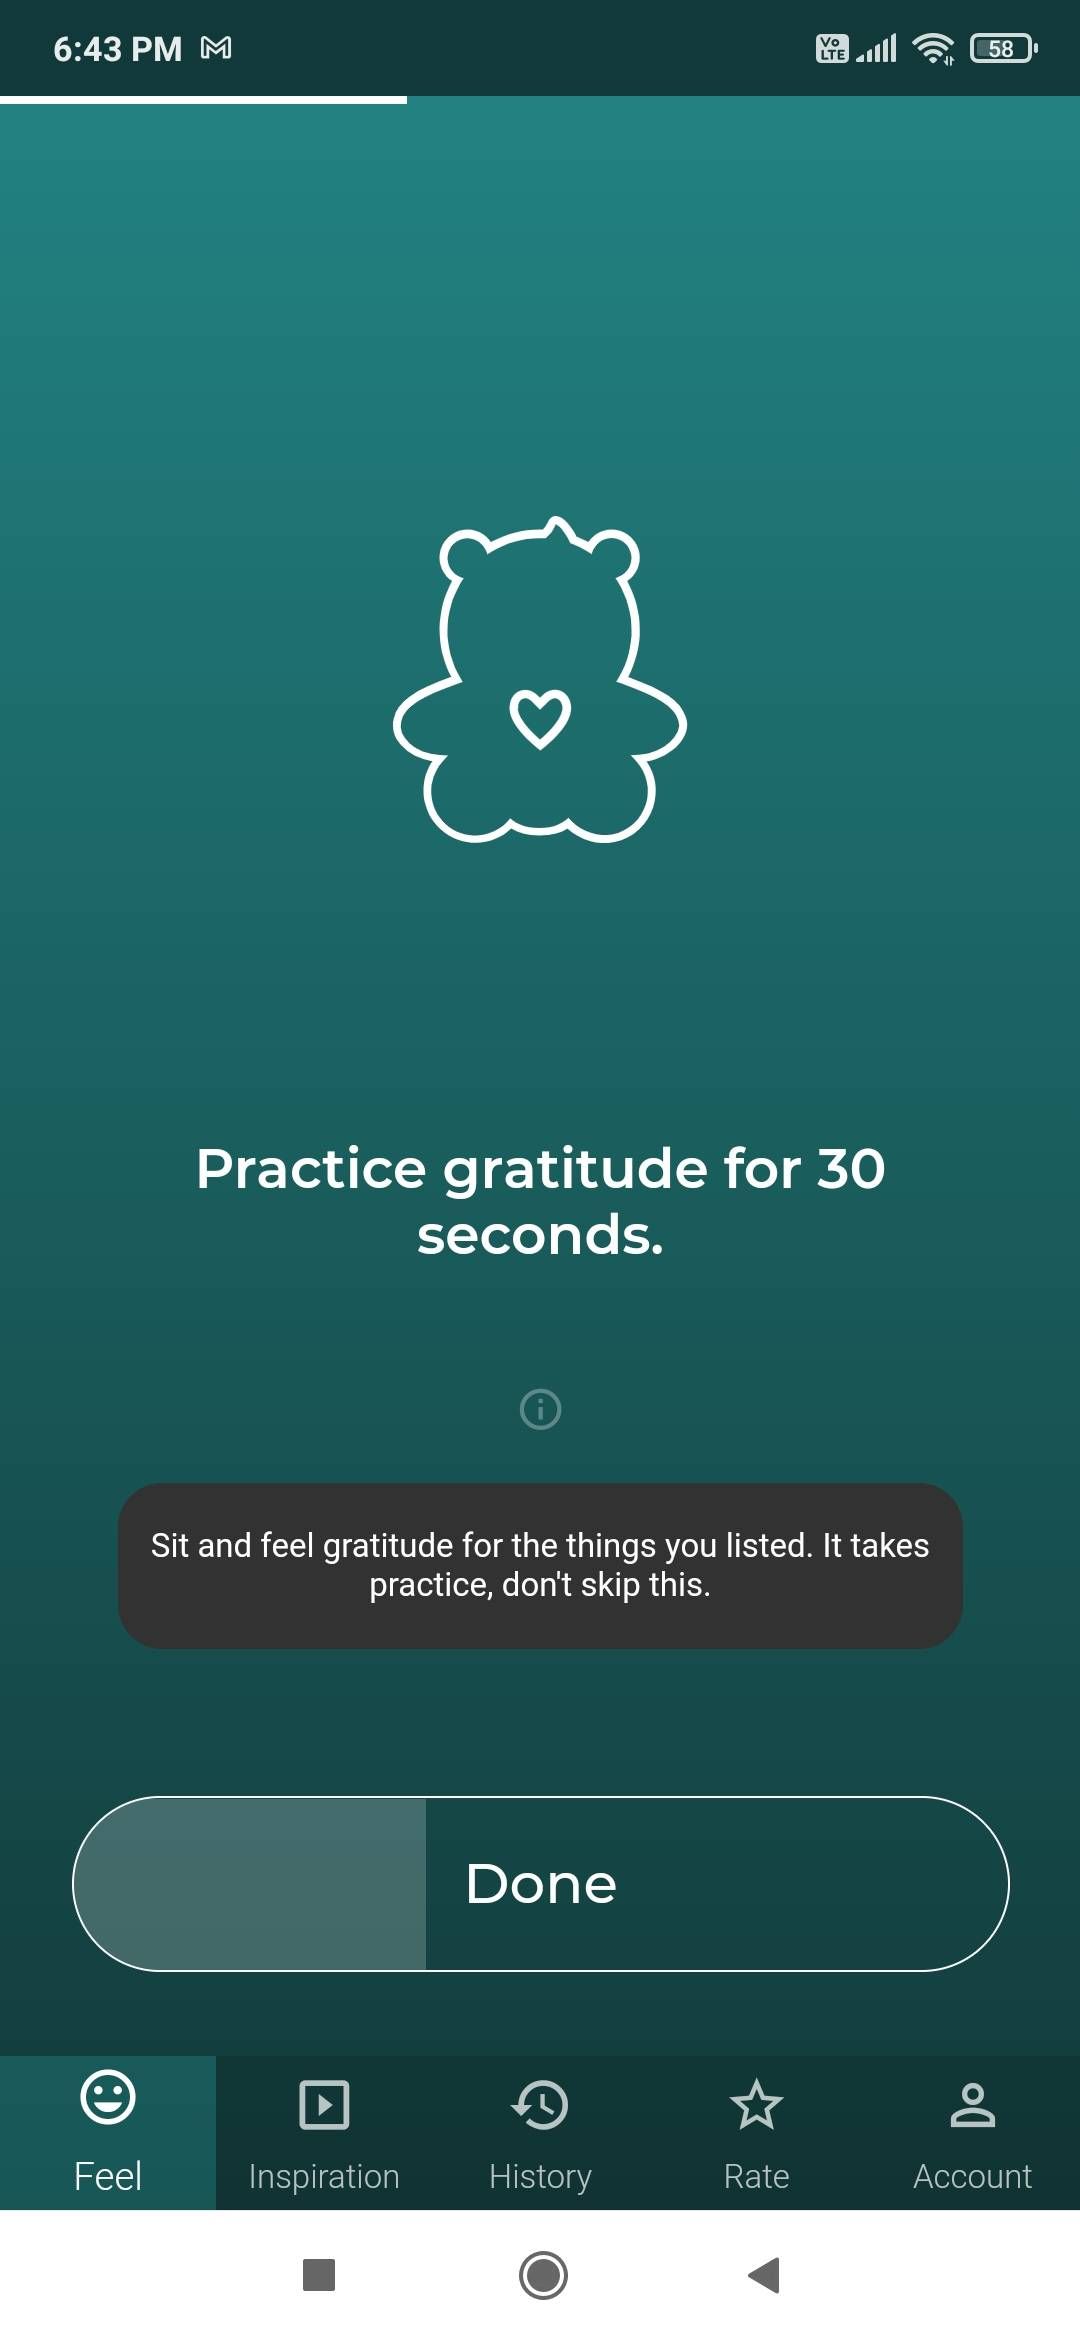 Feel Better app uses focussed happiness sessions like listing five gratitudes and reflecting on them for 30 seconds